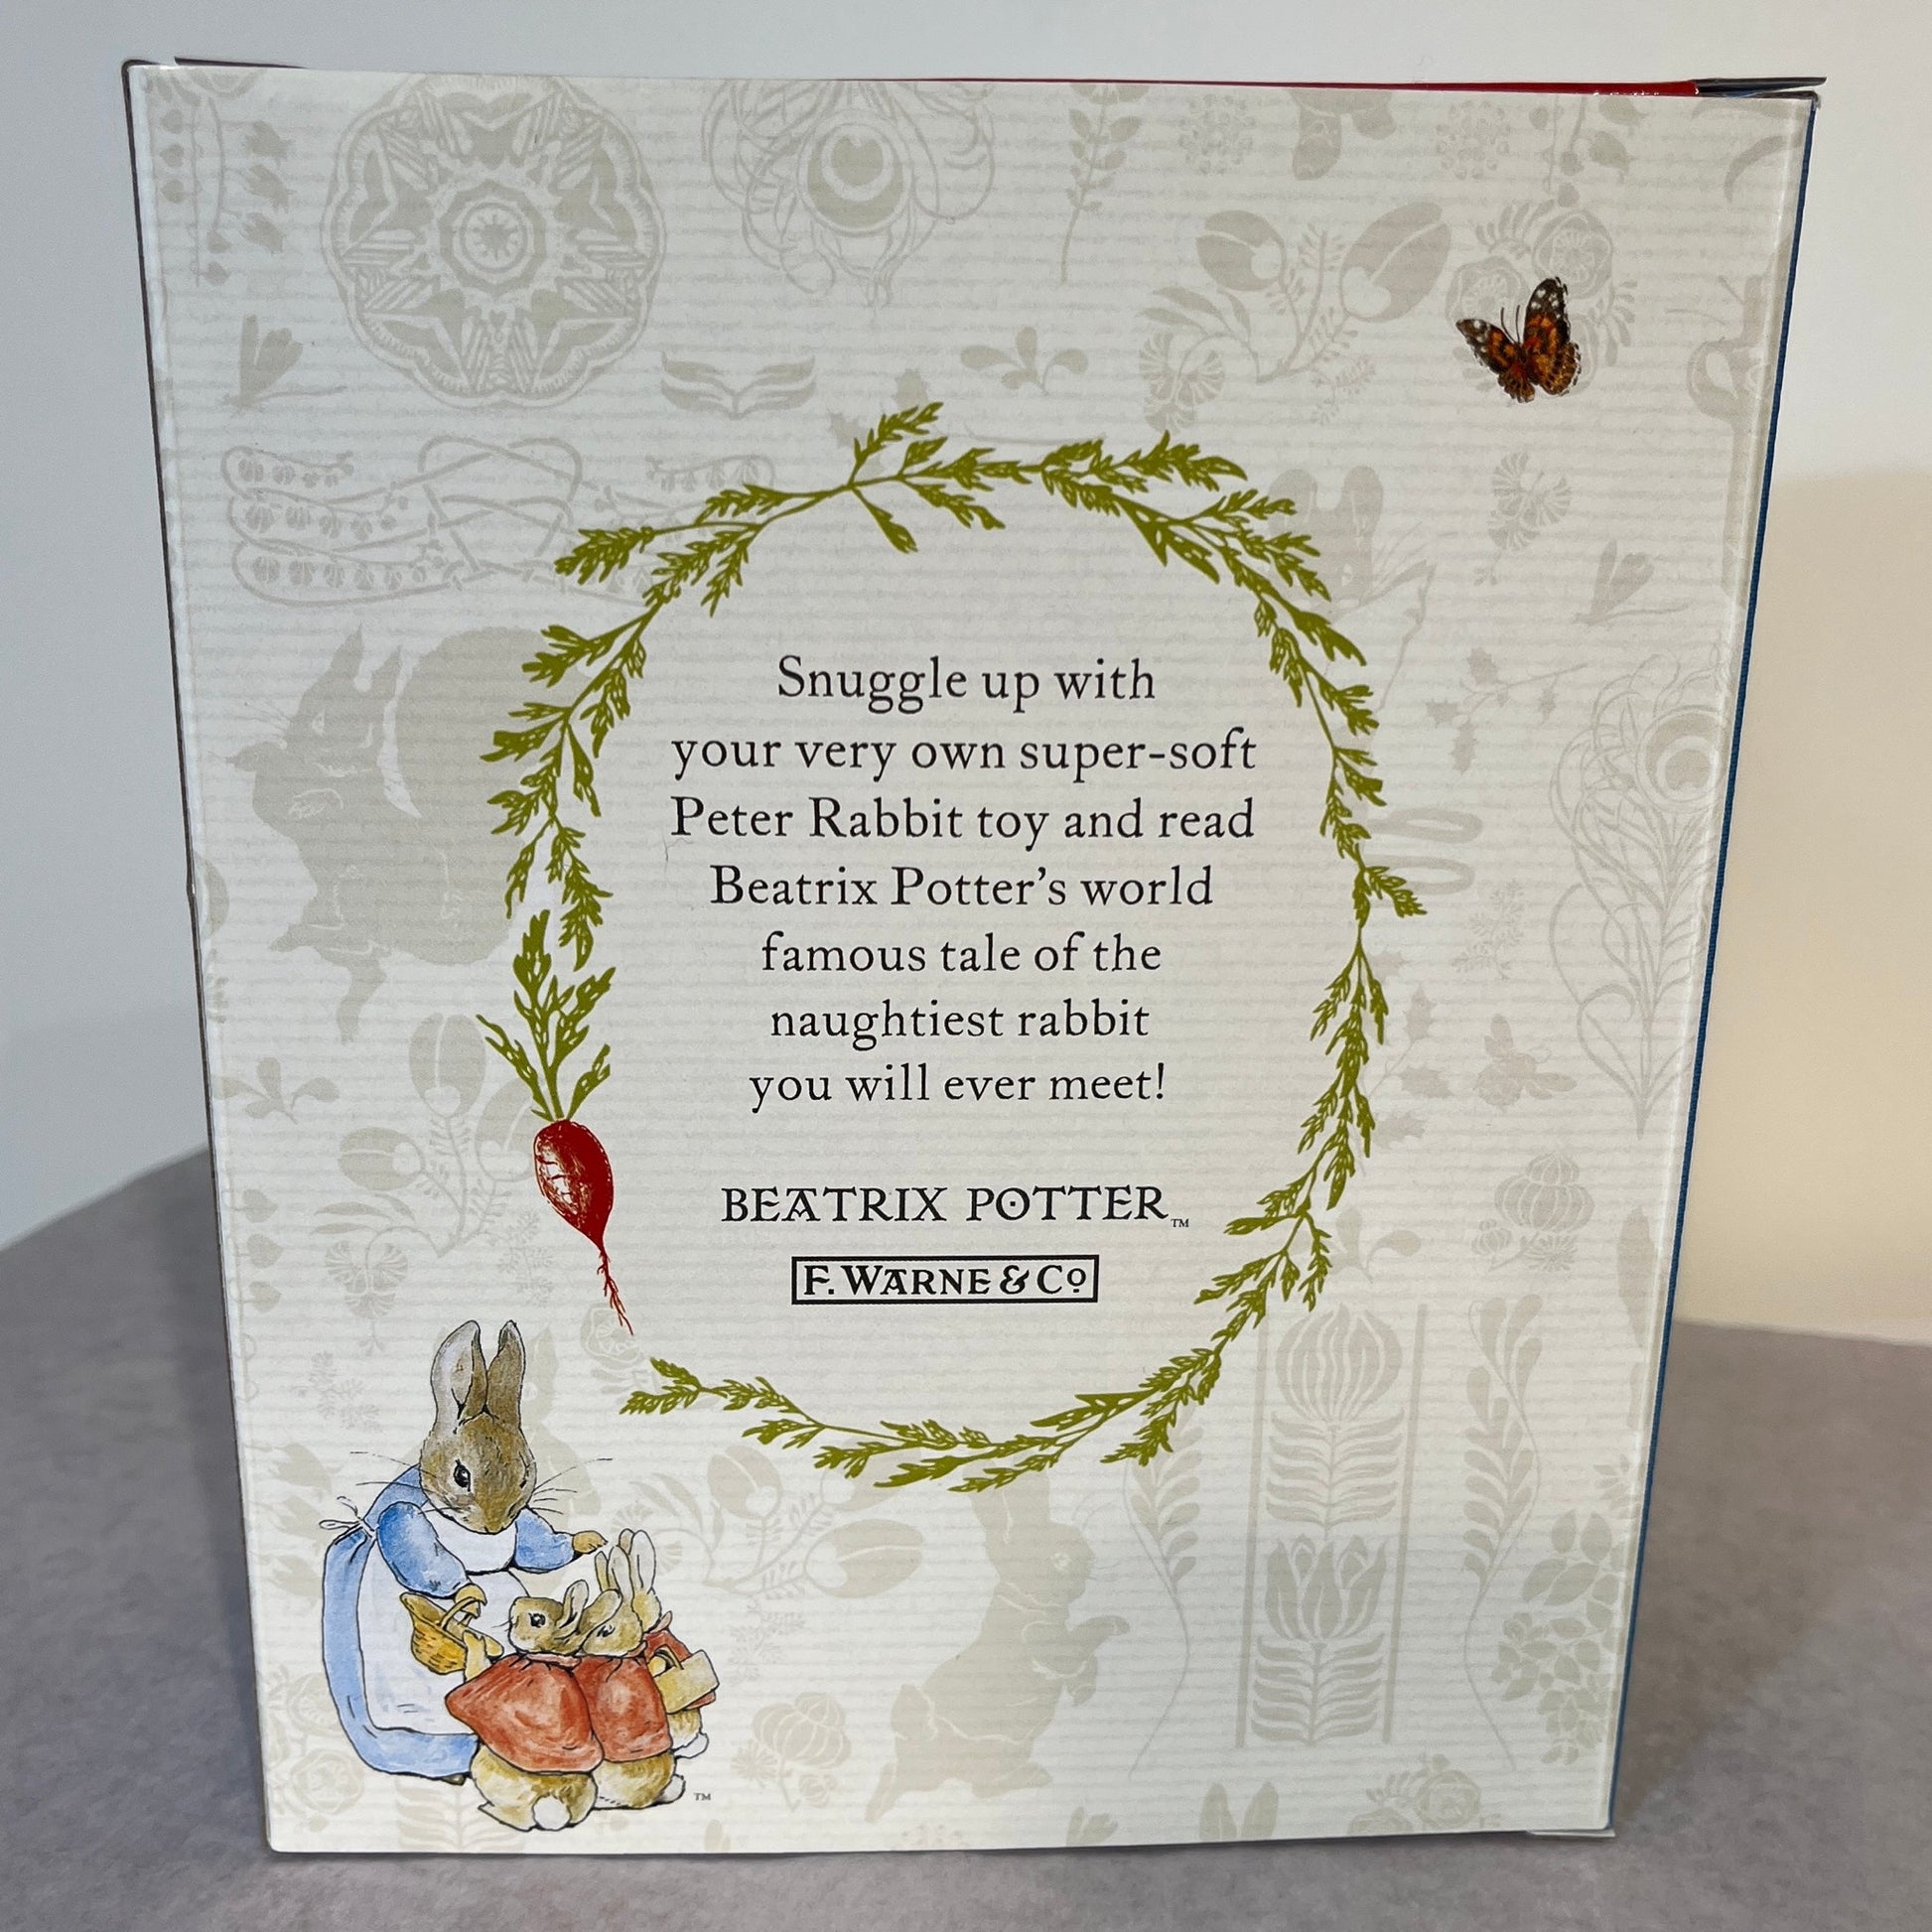 Back of gift package holding Peter Rabbit book and rabbit toy